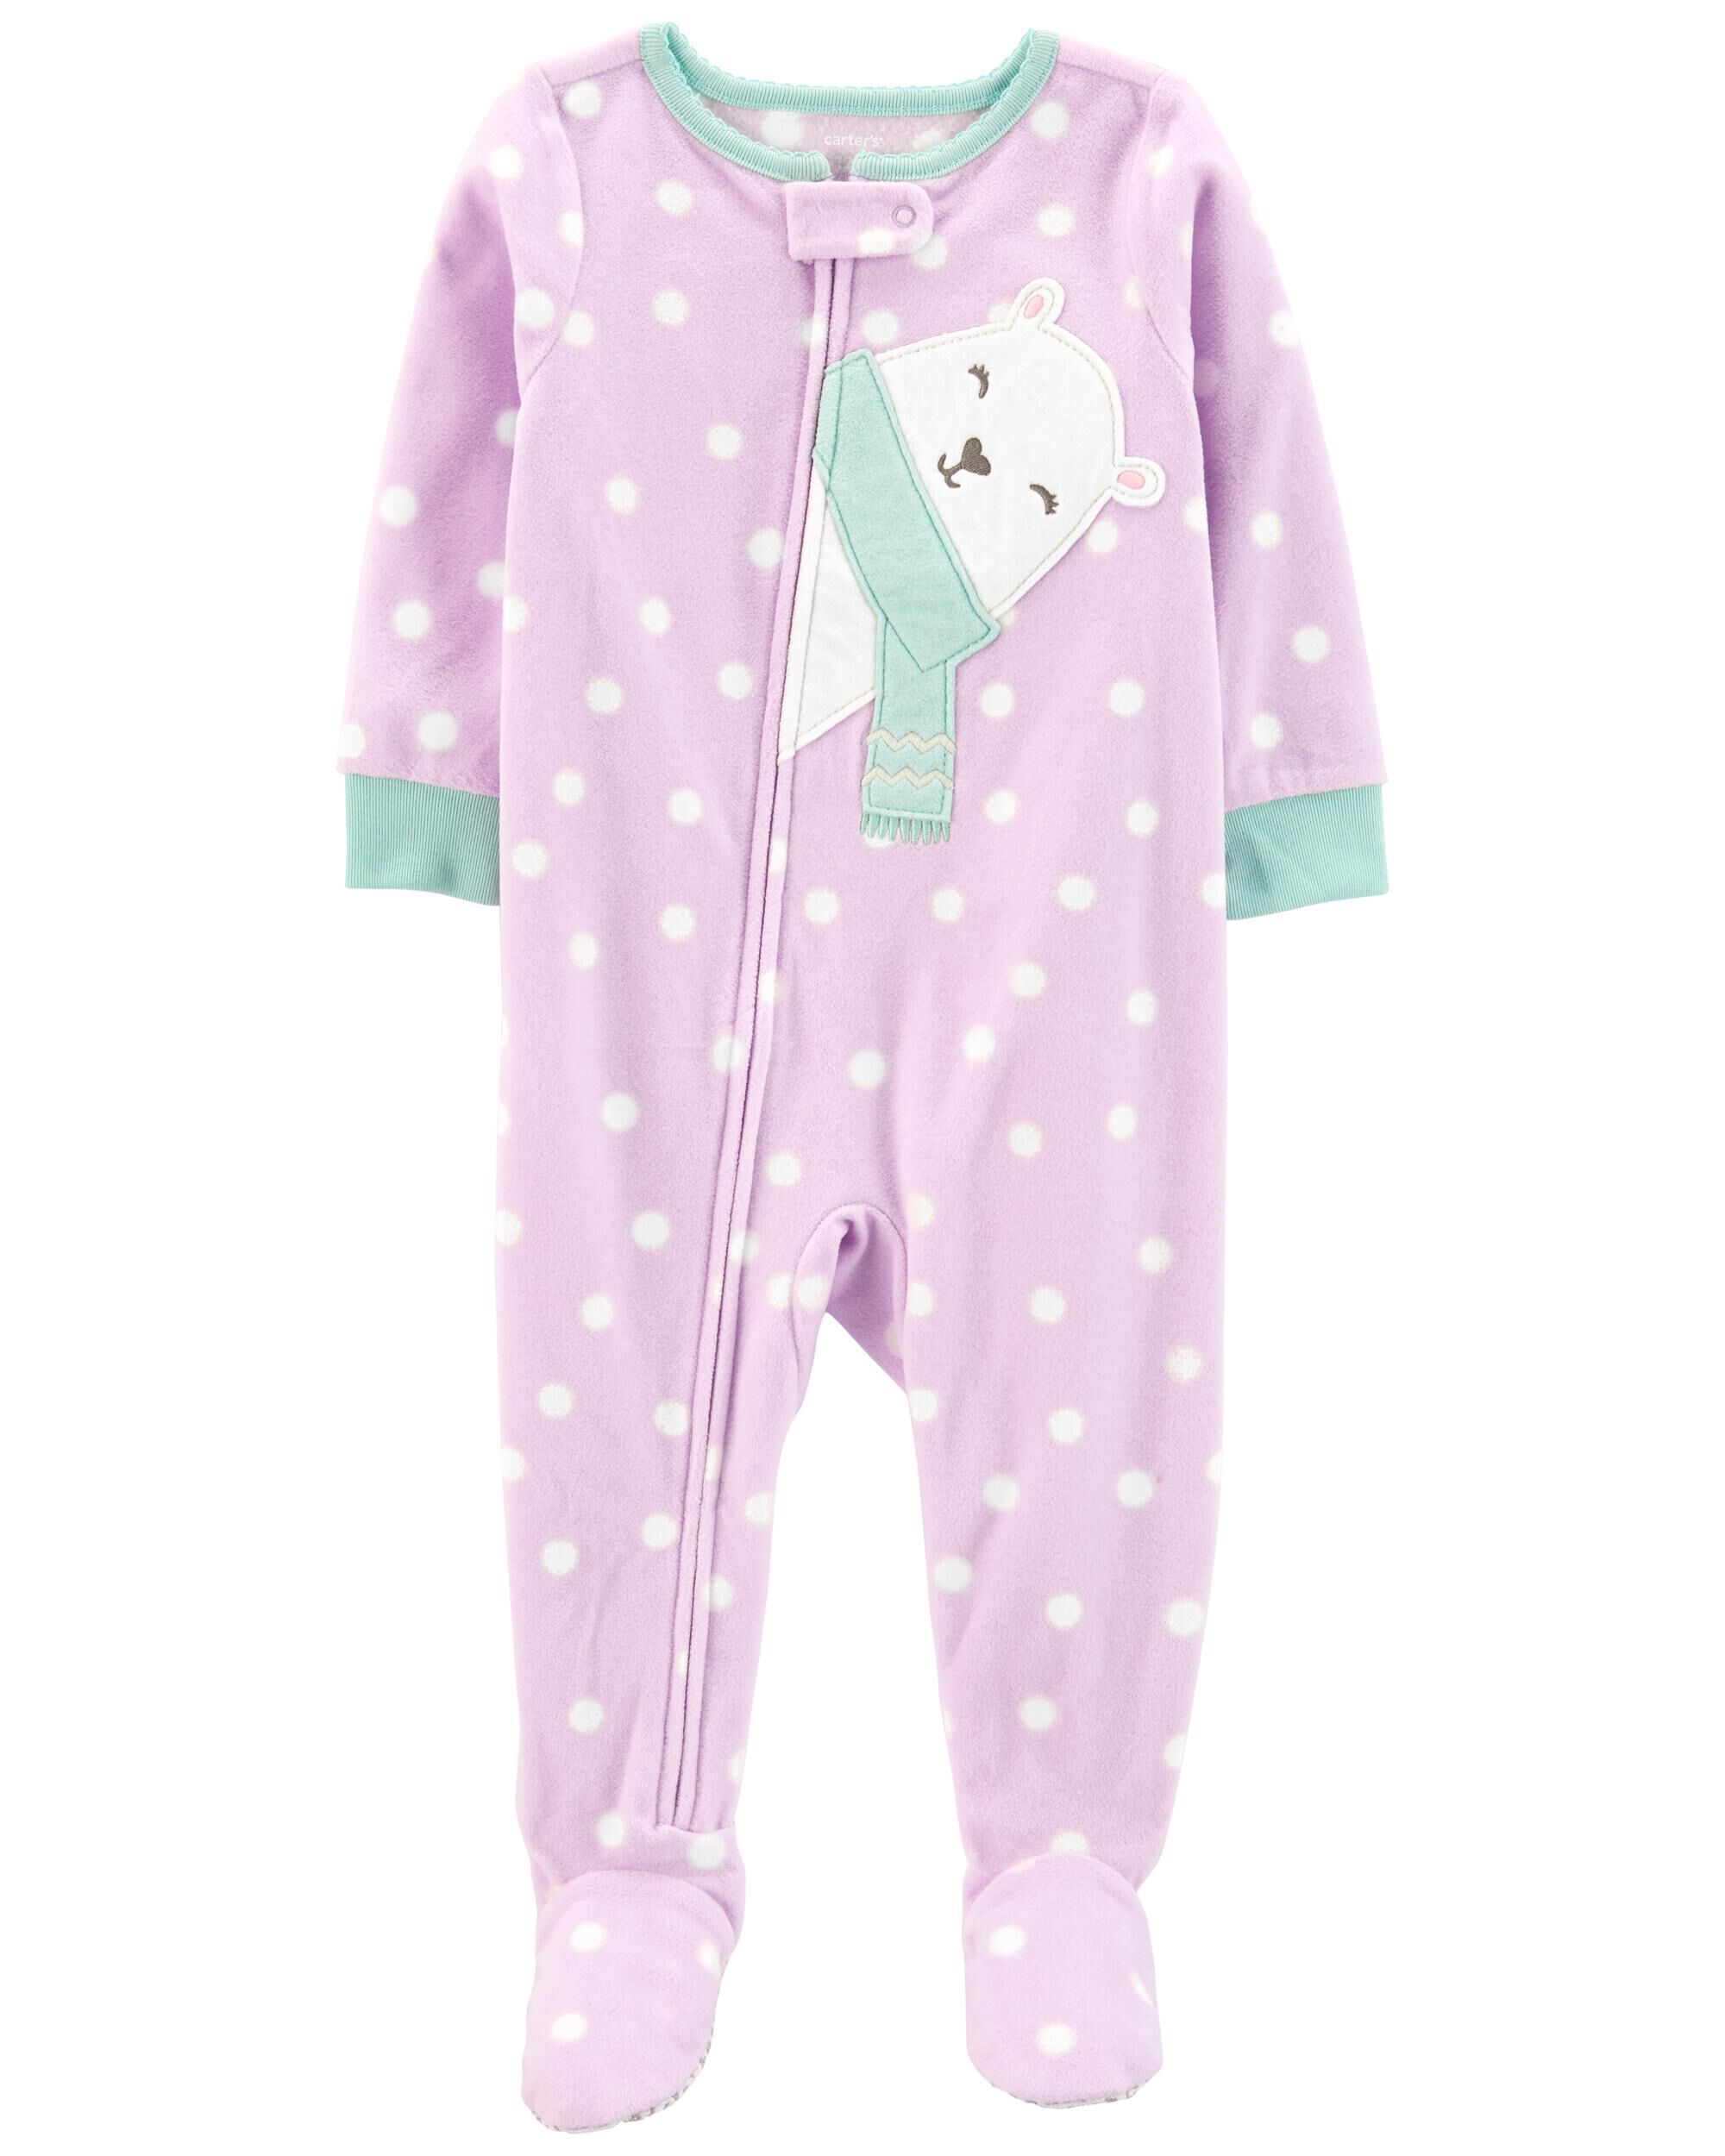 CARTERS CHILD OF MINE GIRLS  SLEEPER  PREEMIE  OWLS  NEW WITH TAGS INFANT 